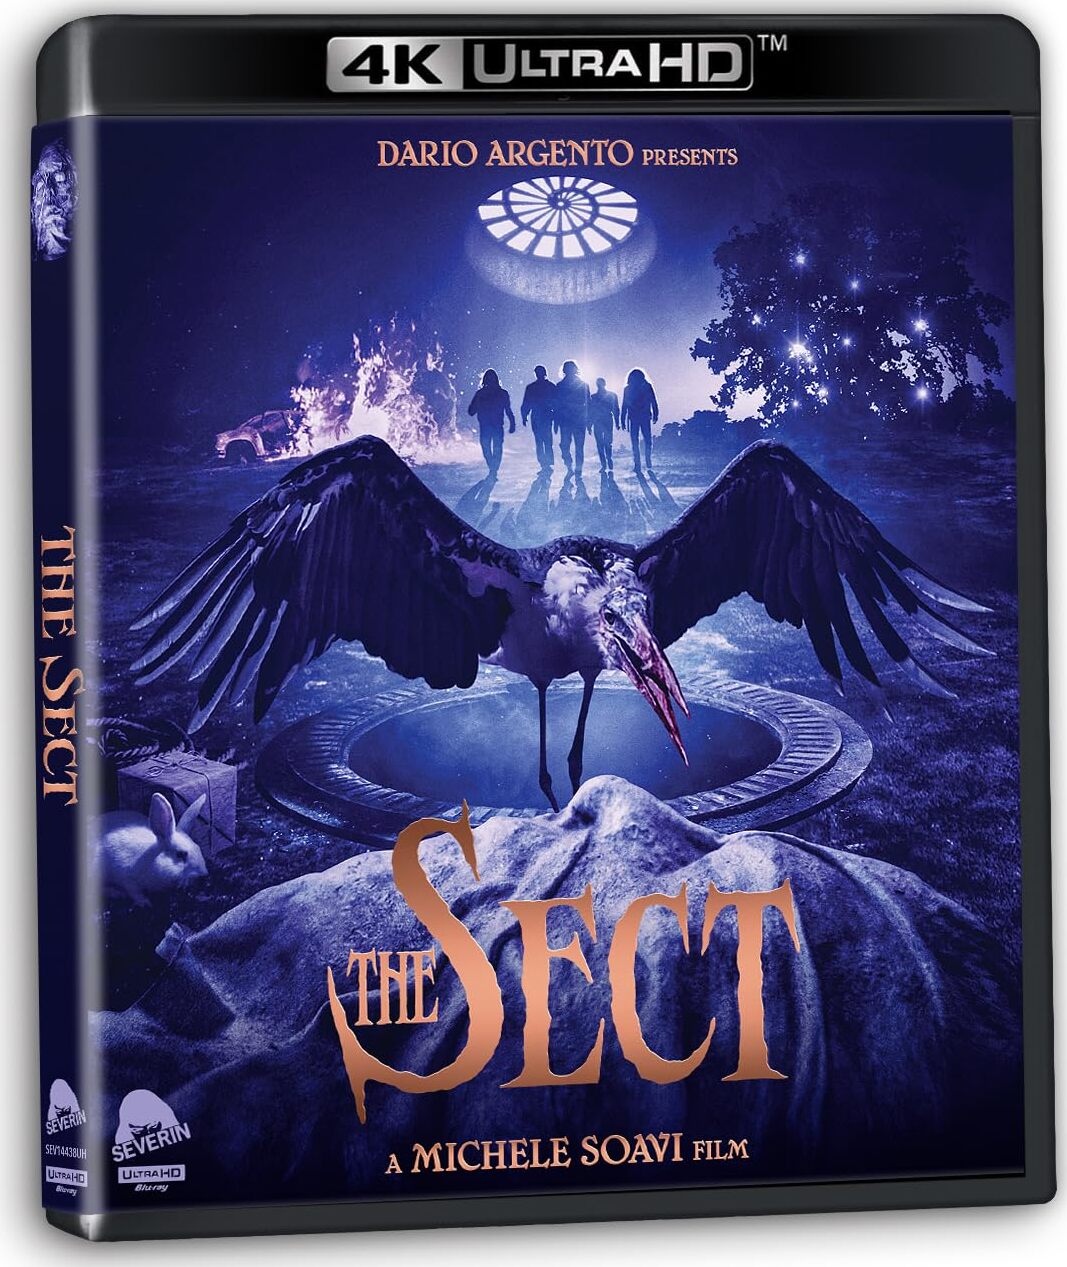 The Sect 4K Blu-ray